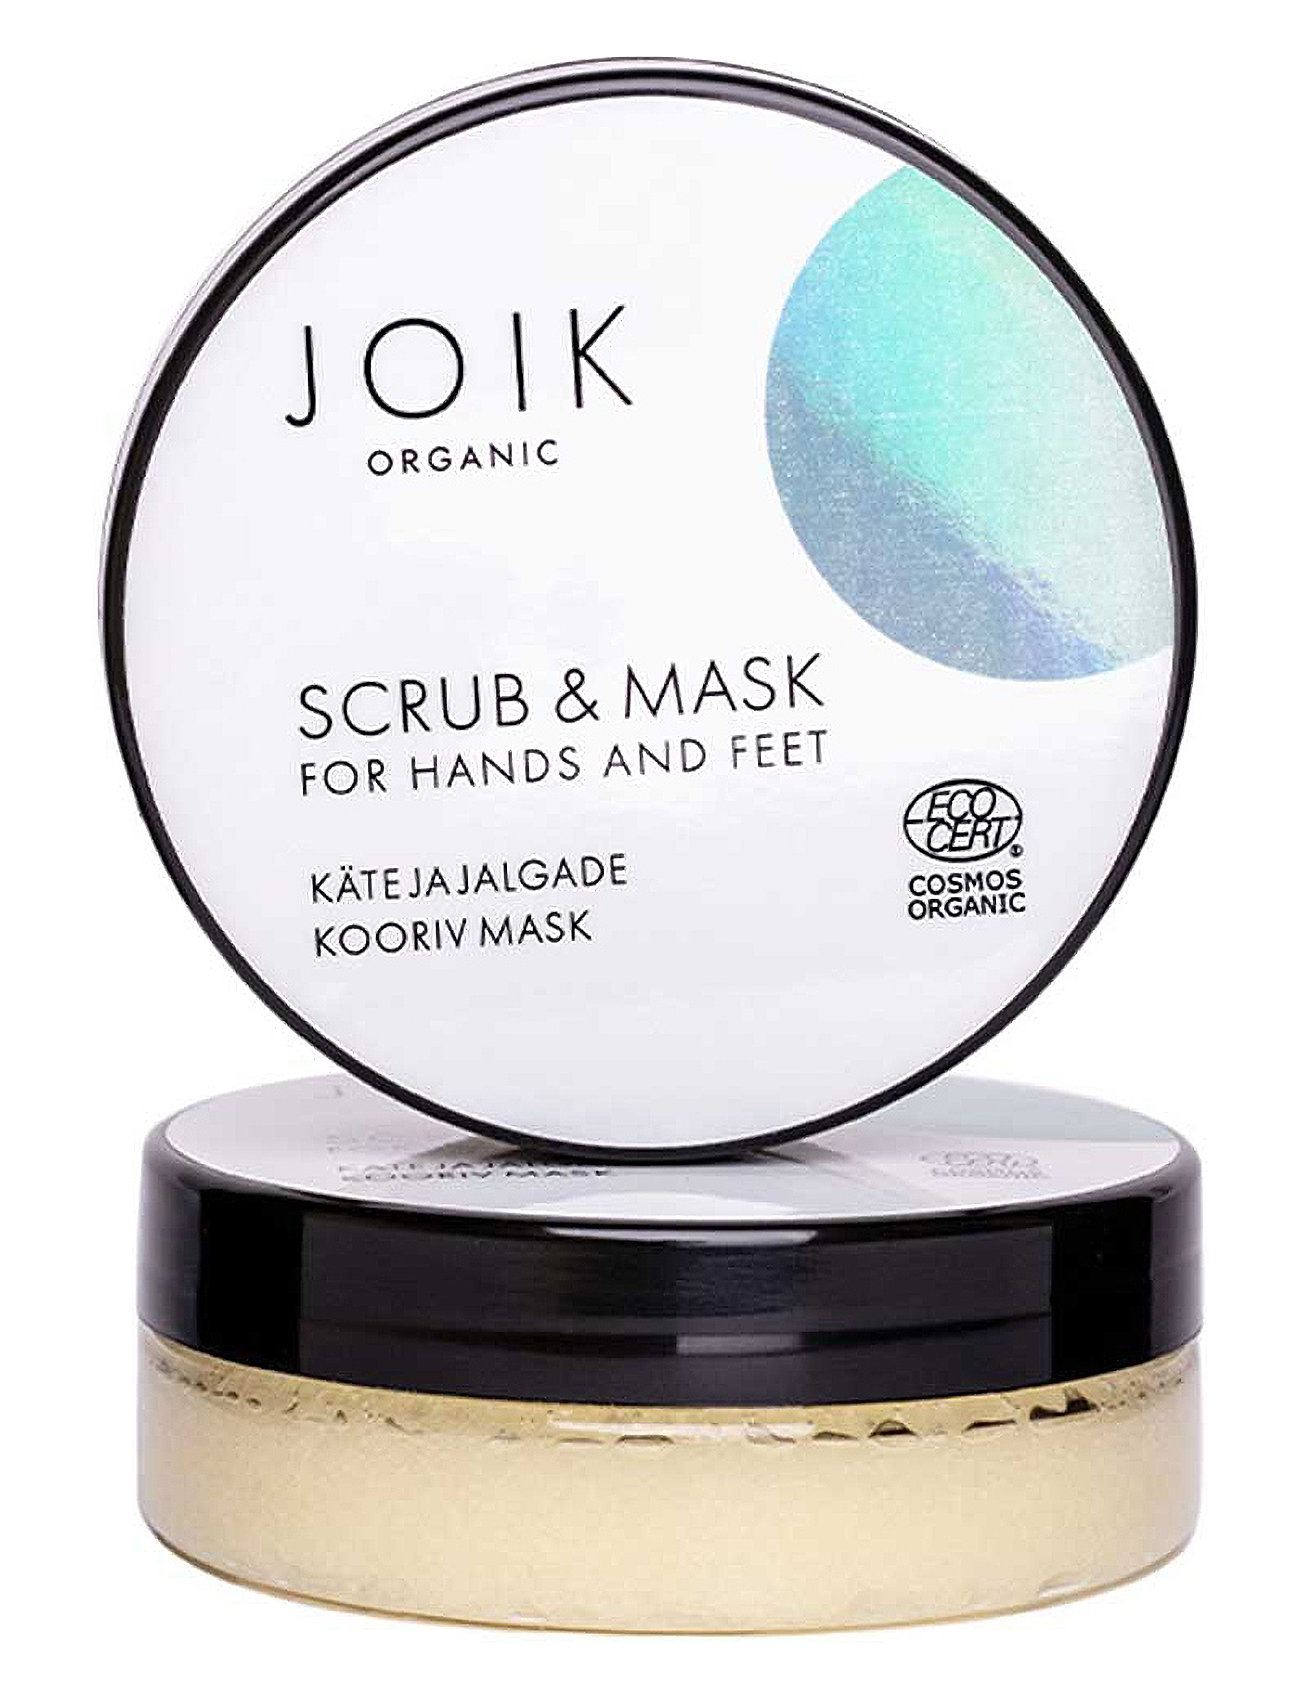 Joik Organic Scrub & Mask For Hands And Feet Beauty Women Skin Care Hand Care Nude JOIK